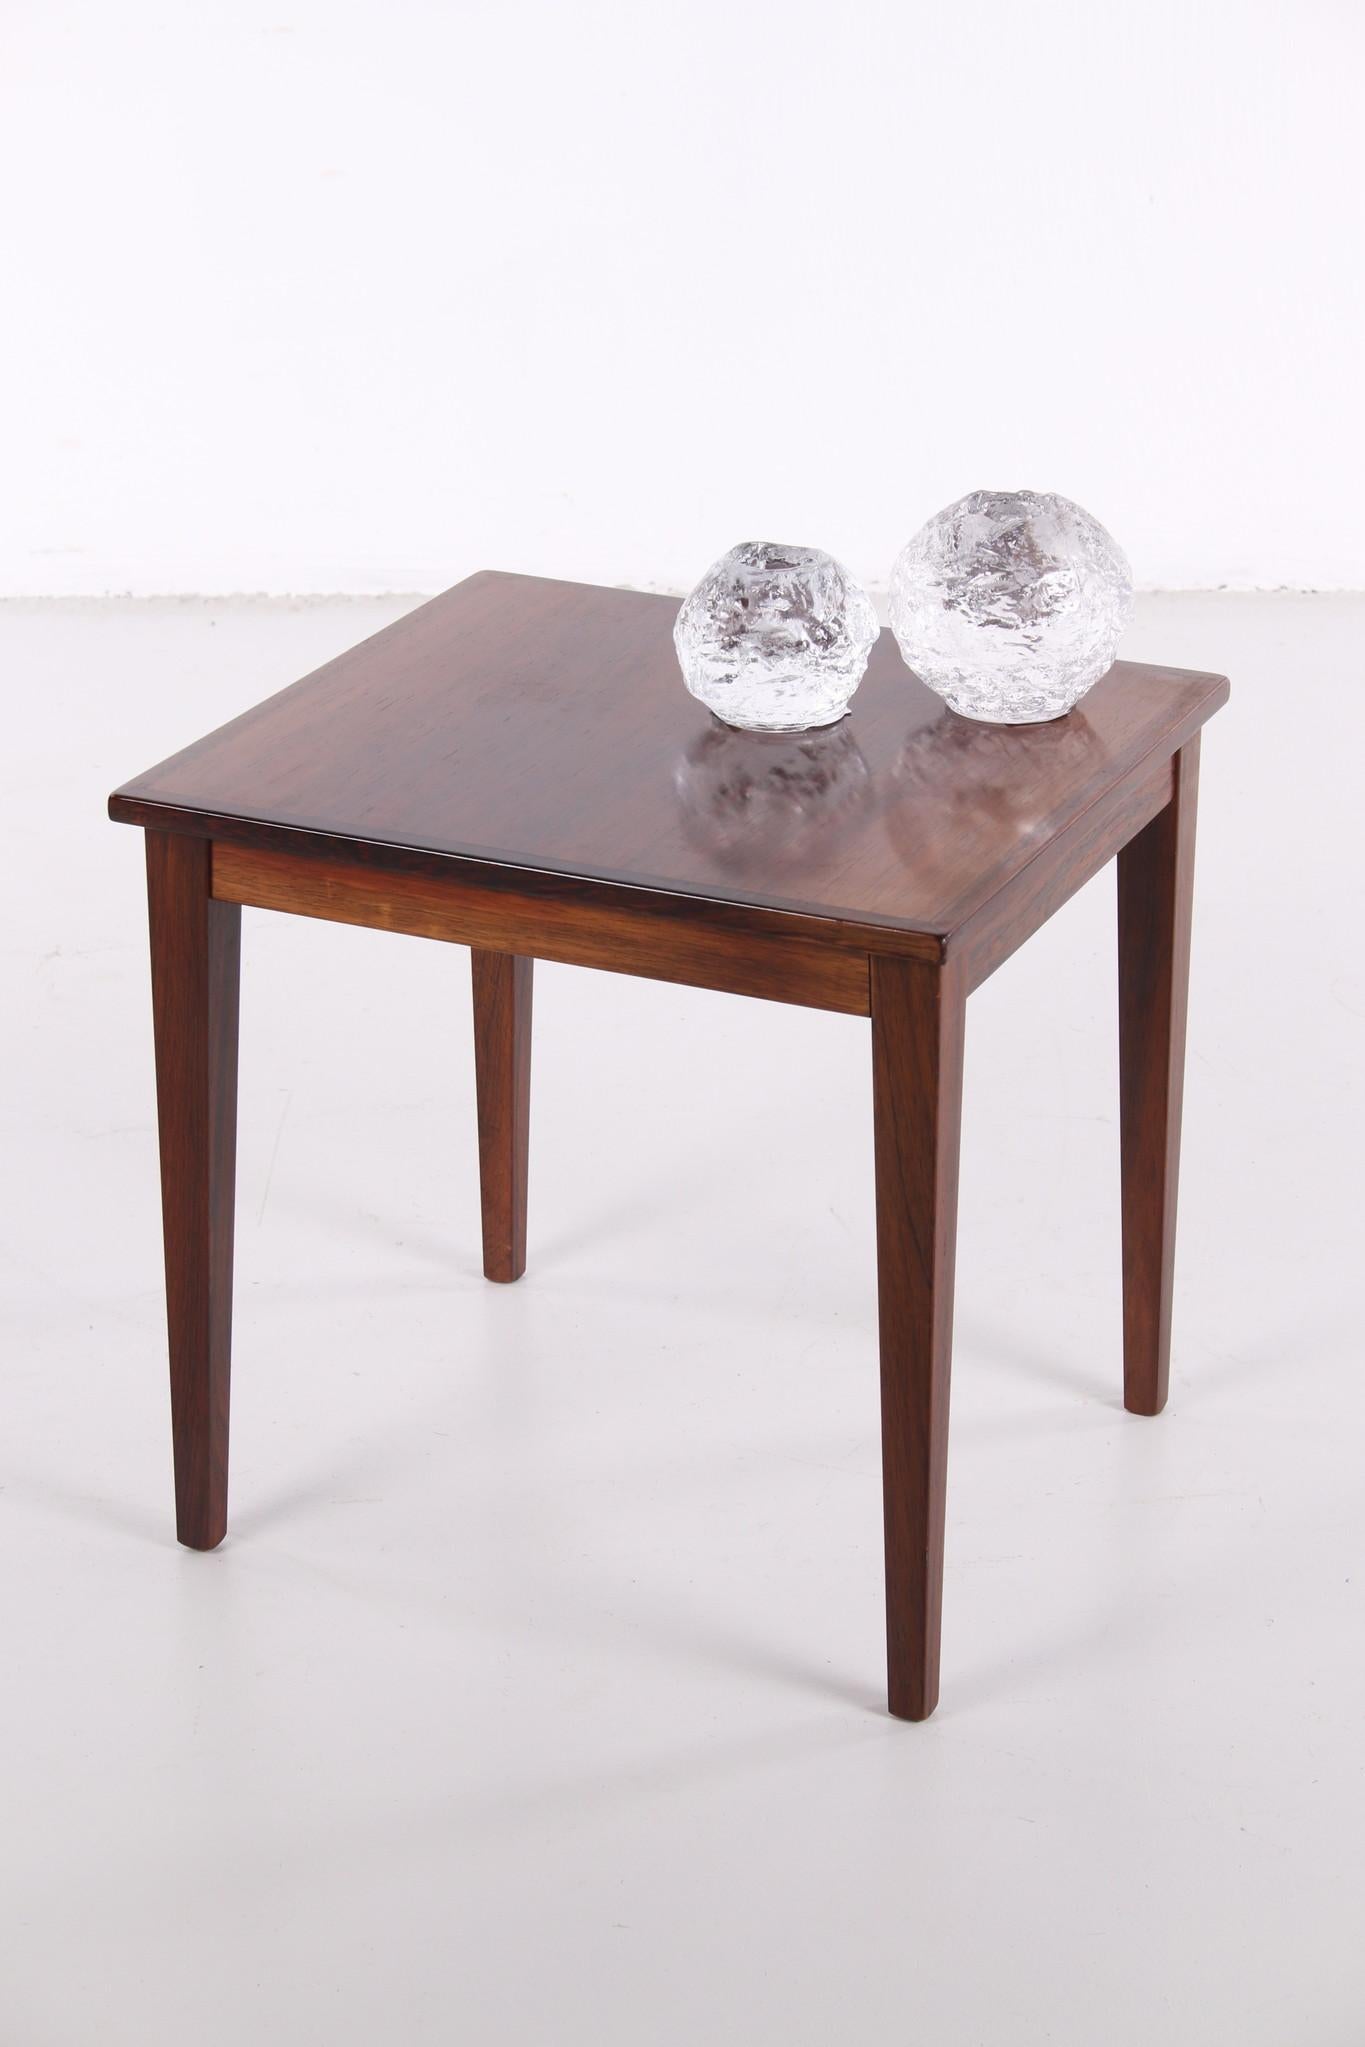 Black wood Plant Table or Side Table, 1960s For Sale 4